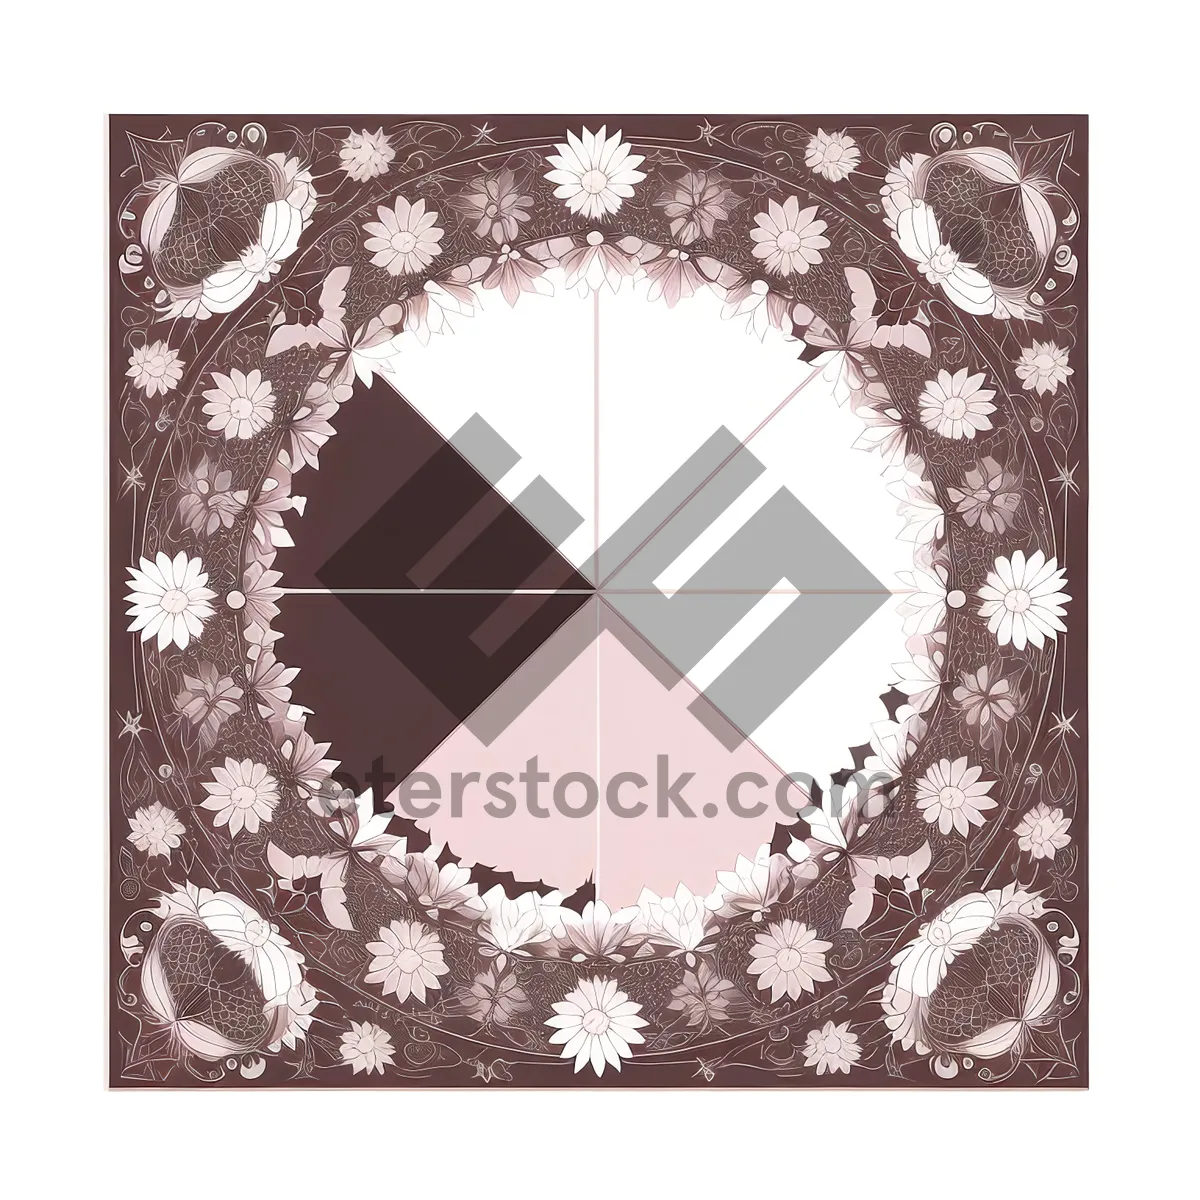 Picture of Floral Decorative Border with Vintage Ornaments and Delicate Arabesque Design